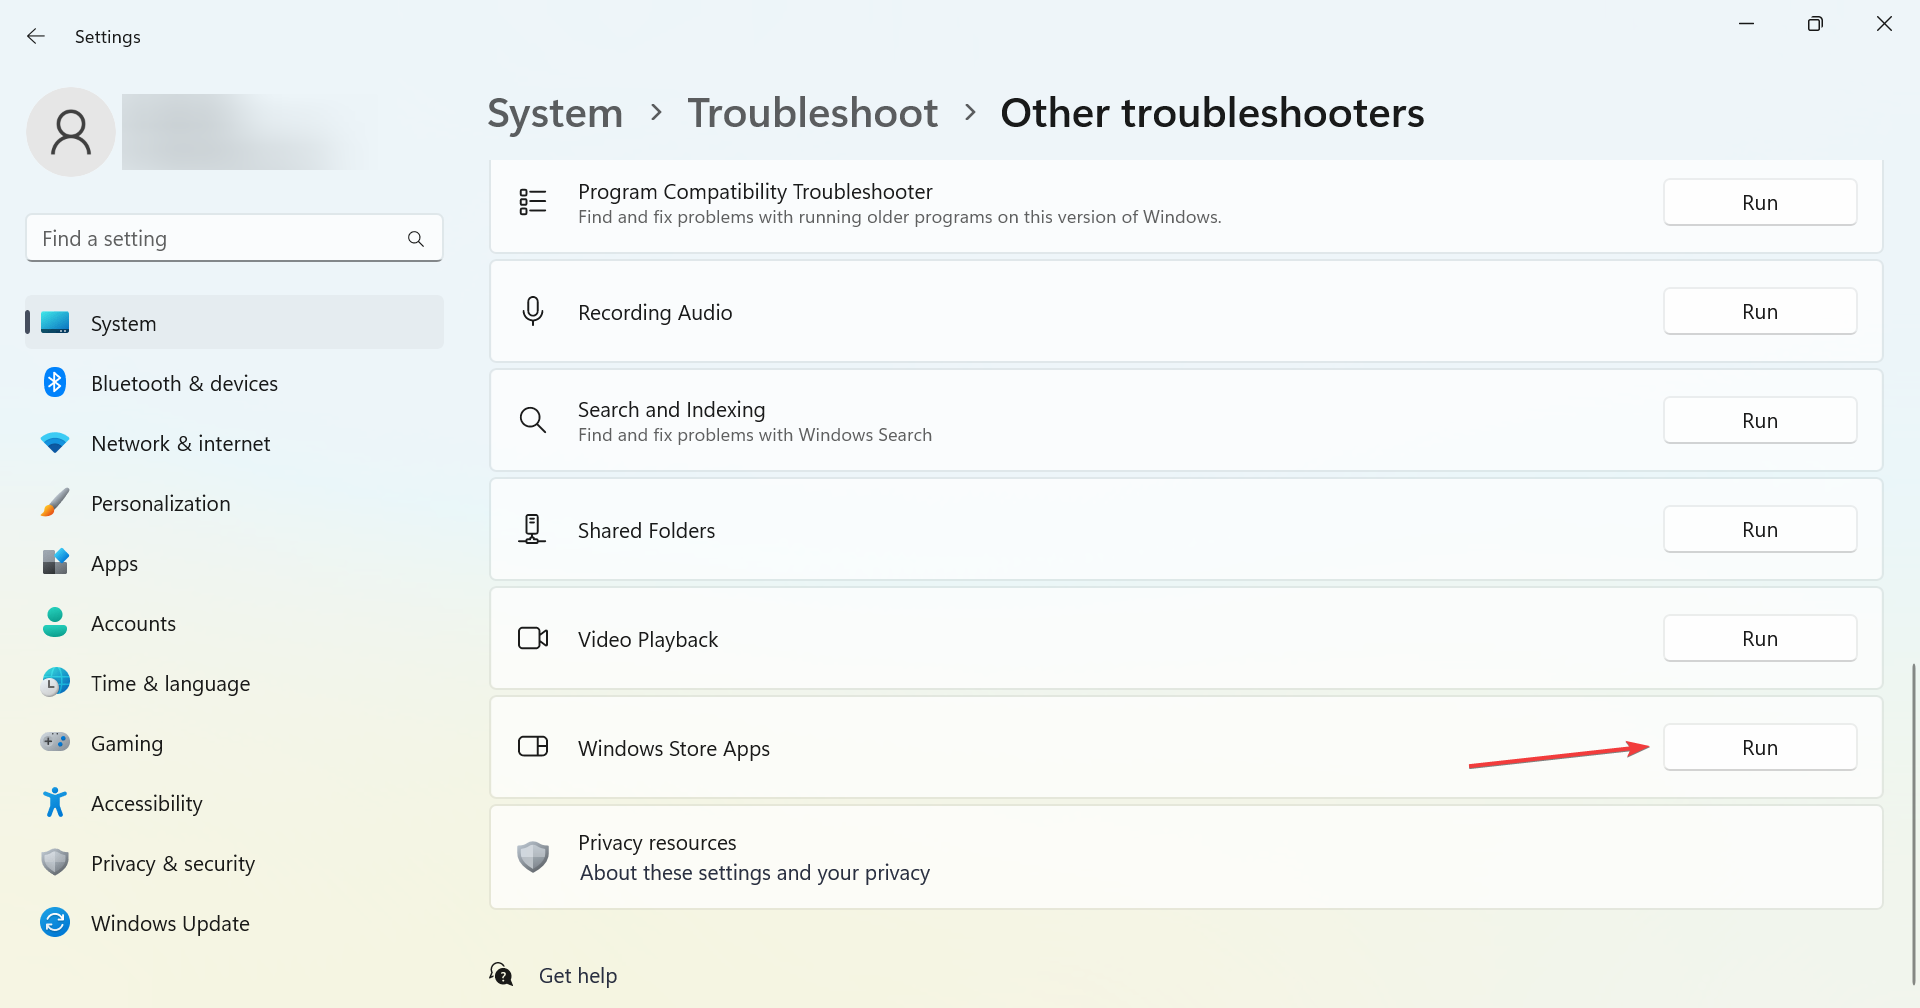 Windows Store Apps troubleshooter to fix Code: 0x87AF0813